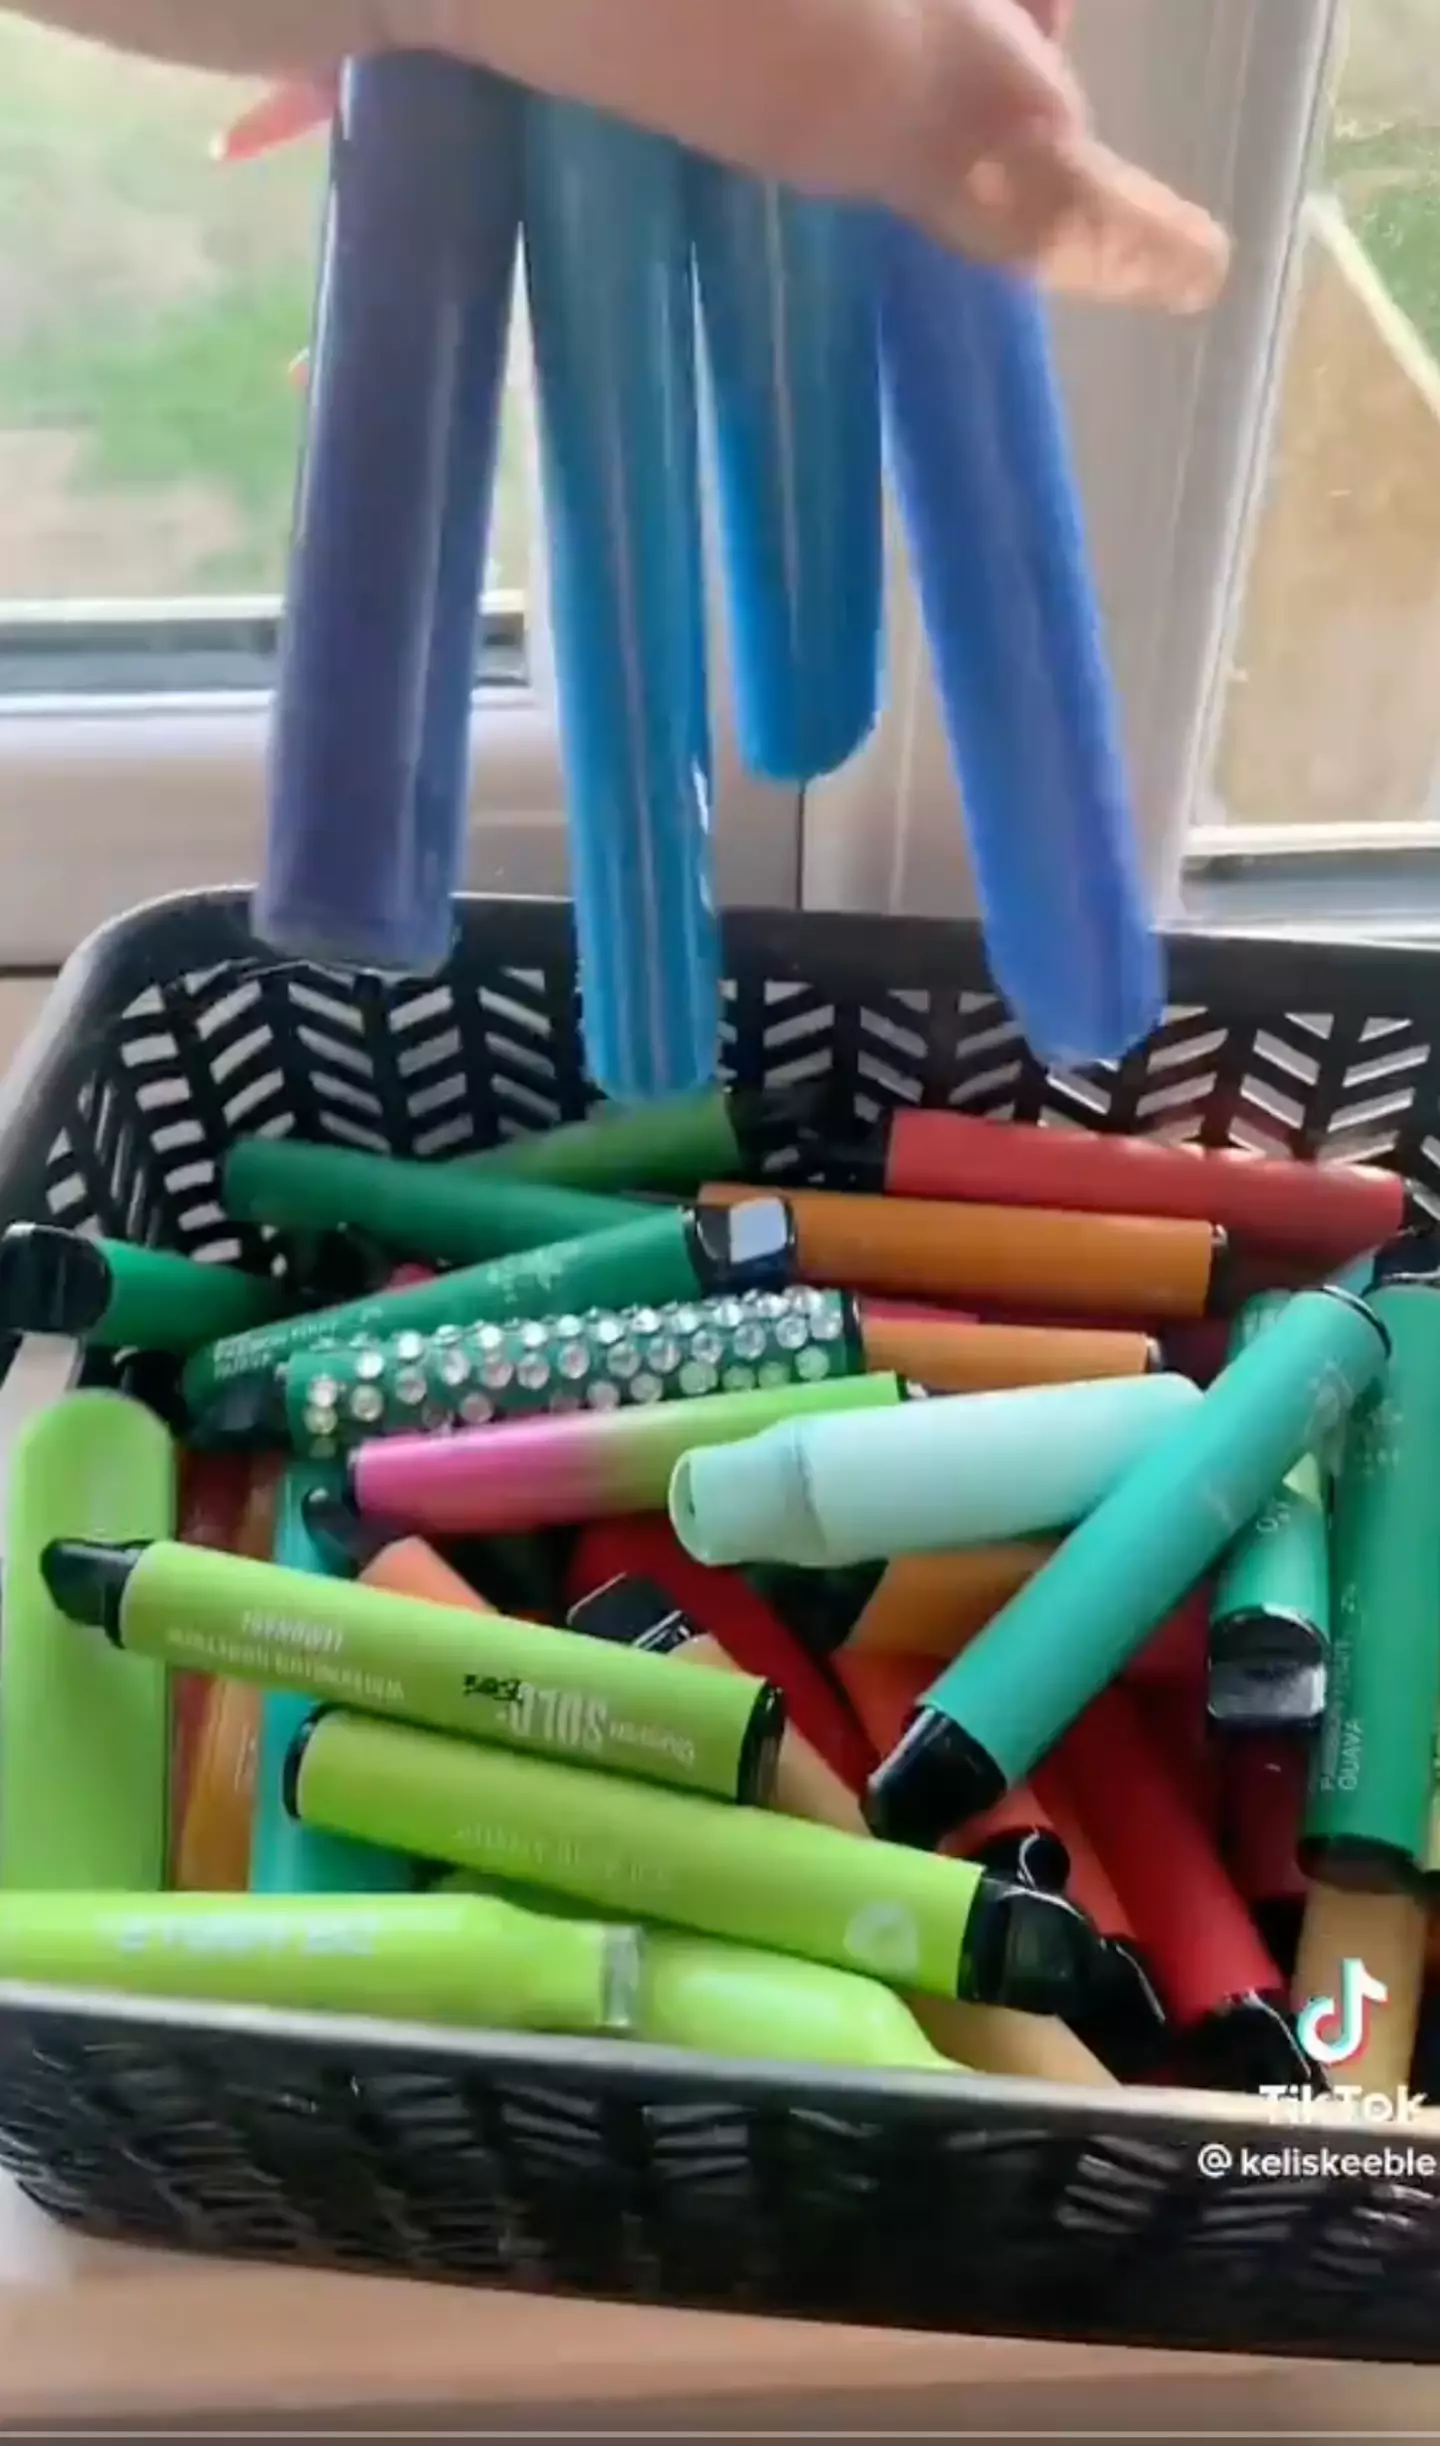 Social media users were shocked by this woman's elf pen collection.